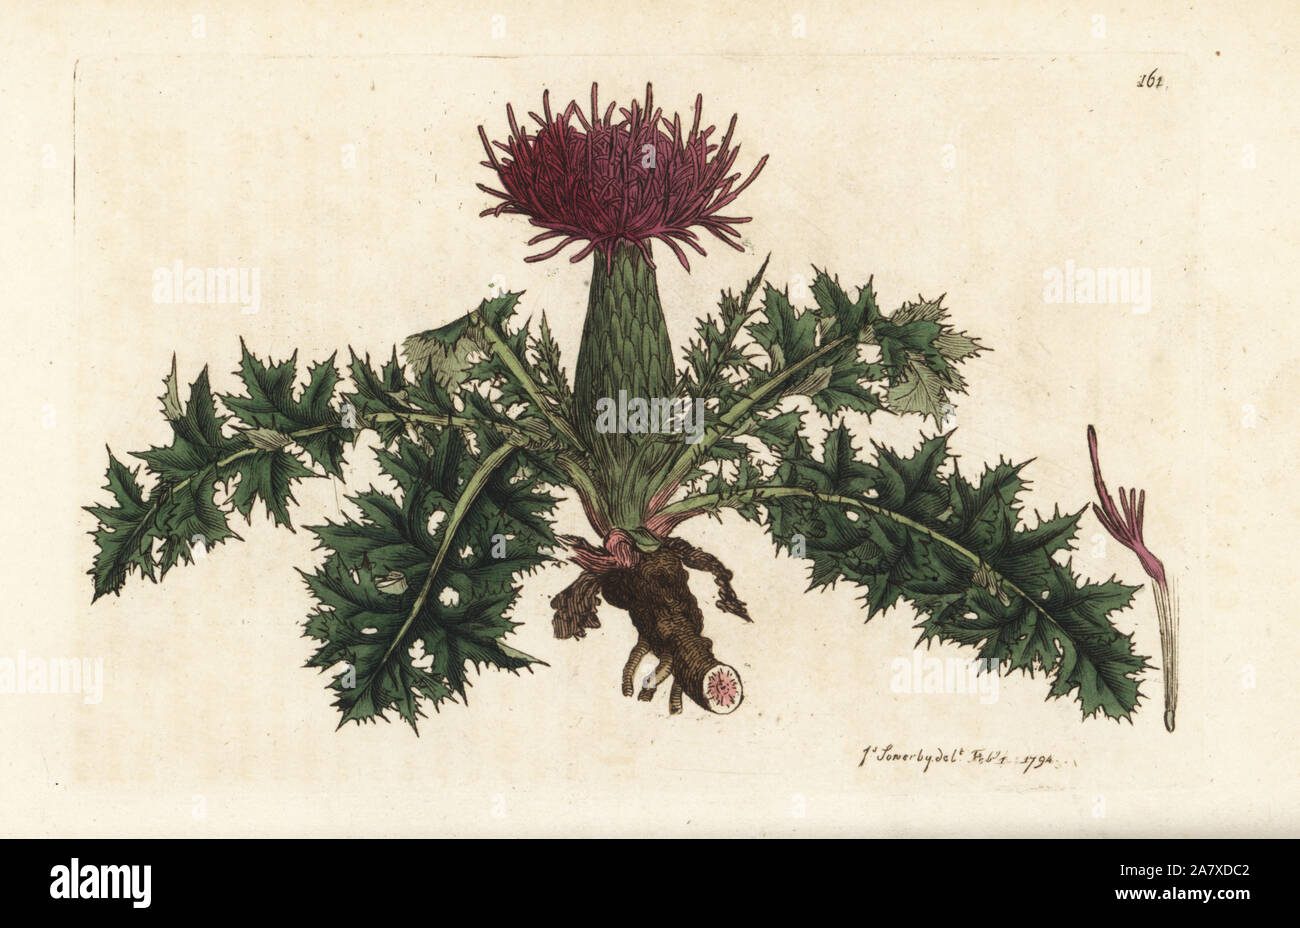 Dwarf thistle, Cirsium acaulon (Carduus acaulis). Handcoloured copperplate engraving by James Sowerby from James Smith's English Botany, London, 1794. Stock Photo